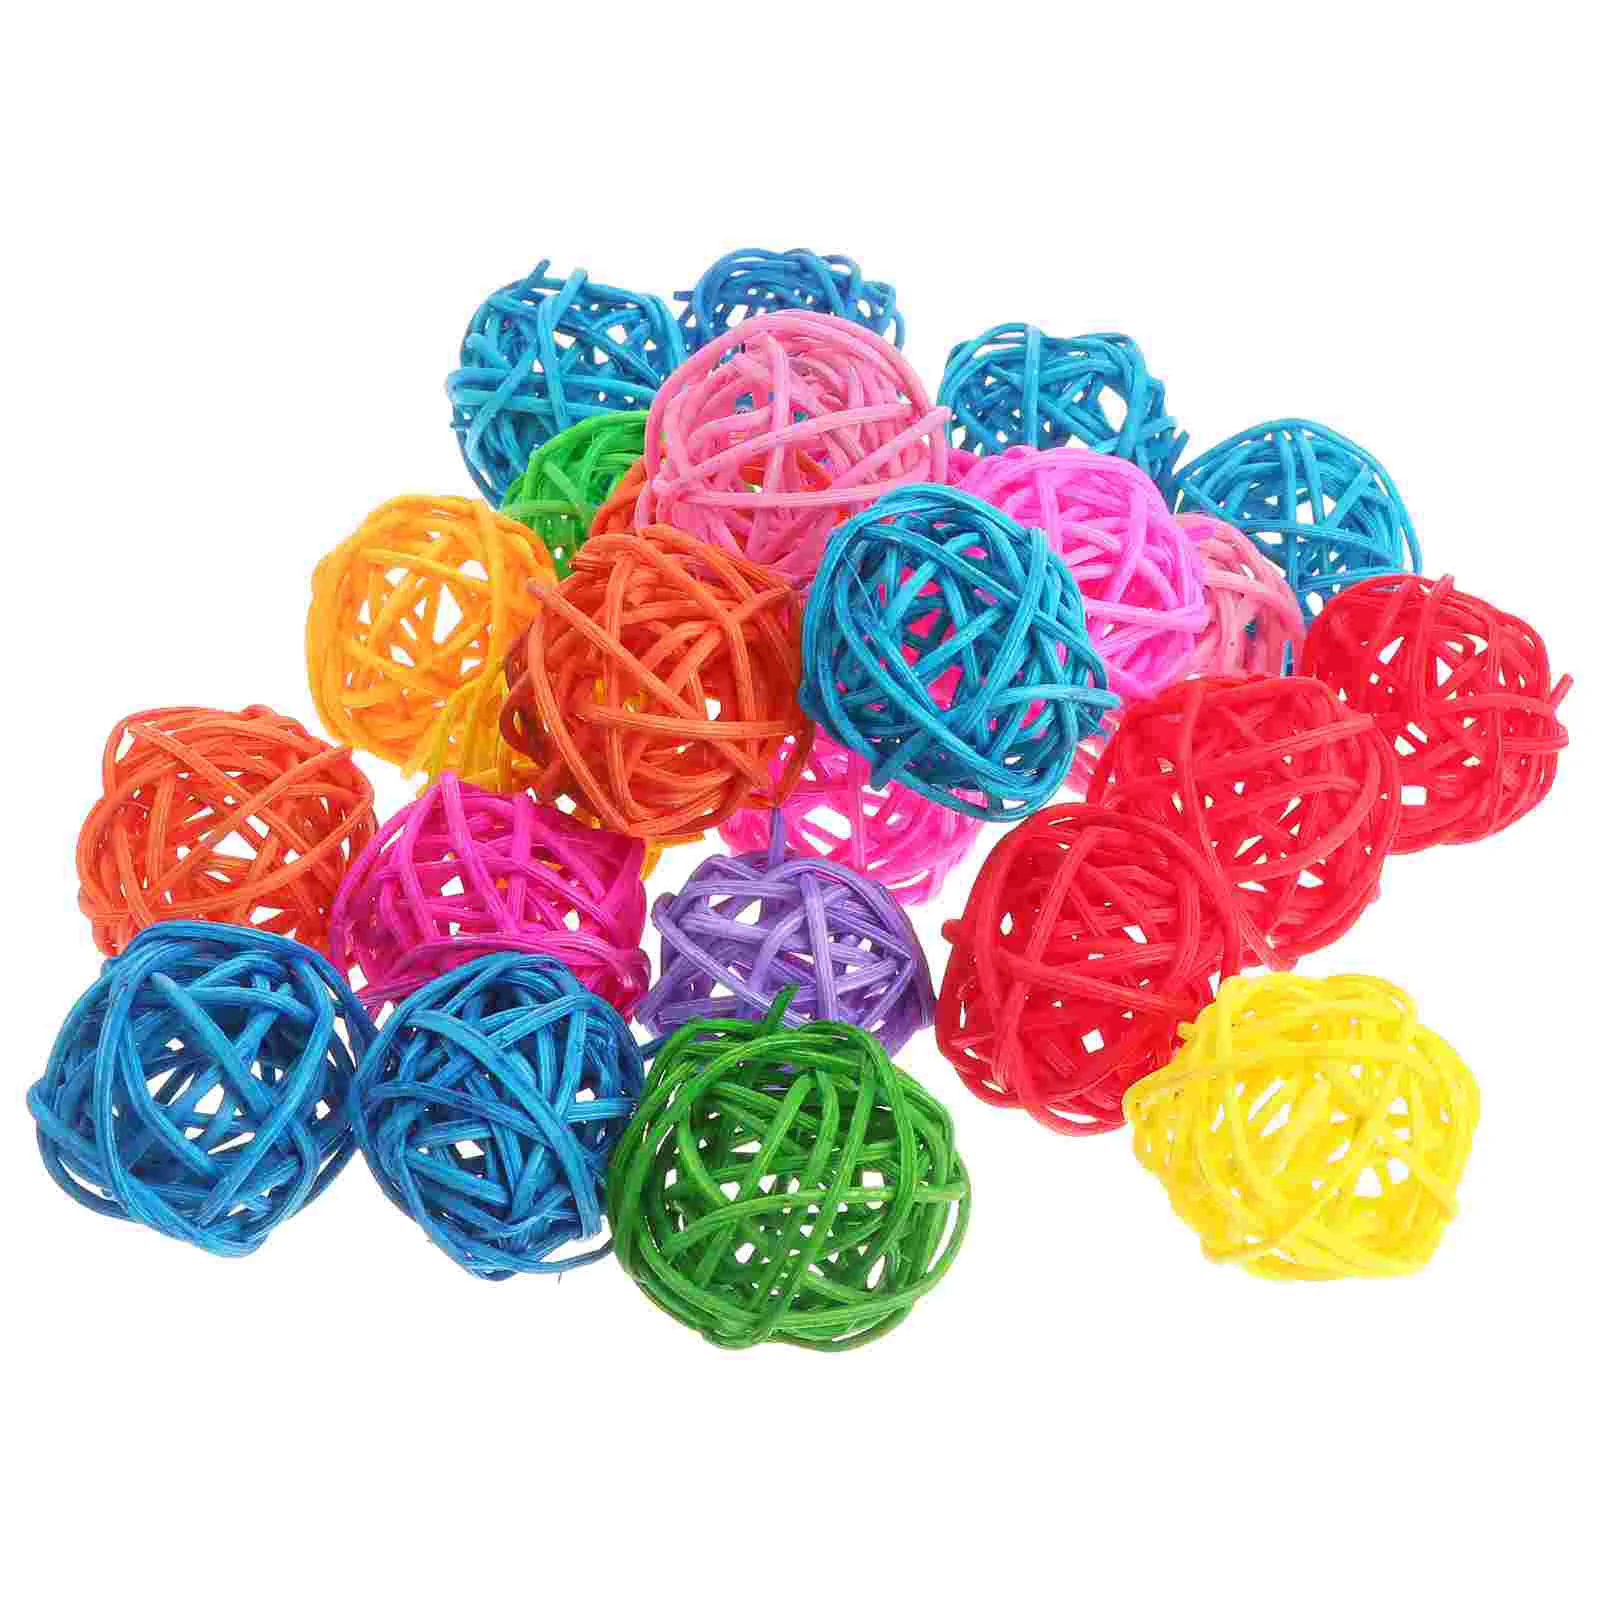 

Birds Rattan Balls, Parrot Chewing Toys Bite Toys for Budgies Conures Hamsters Orbs Crafts DIY Accessories Vase Fillers 50PCS